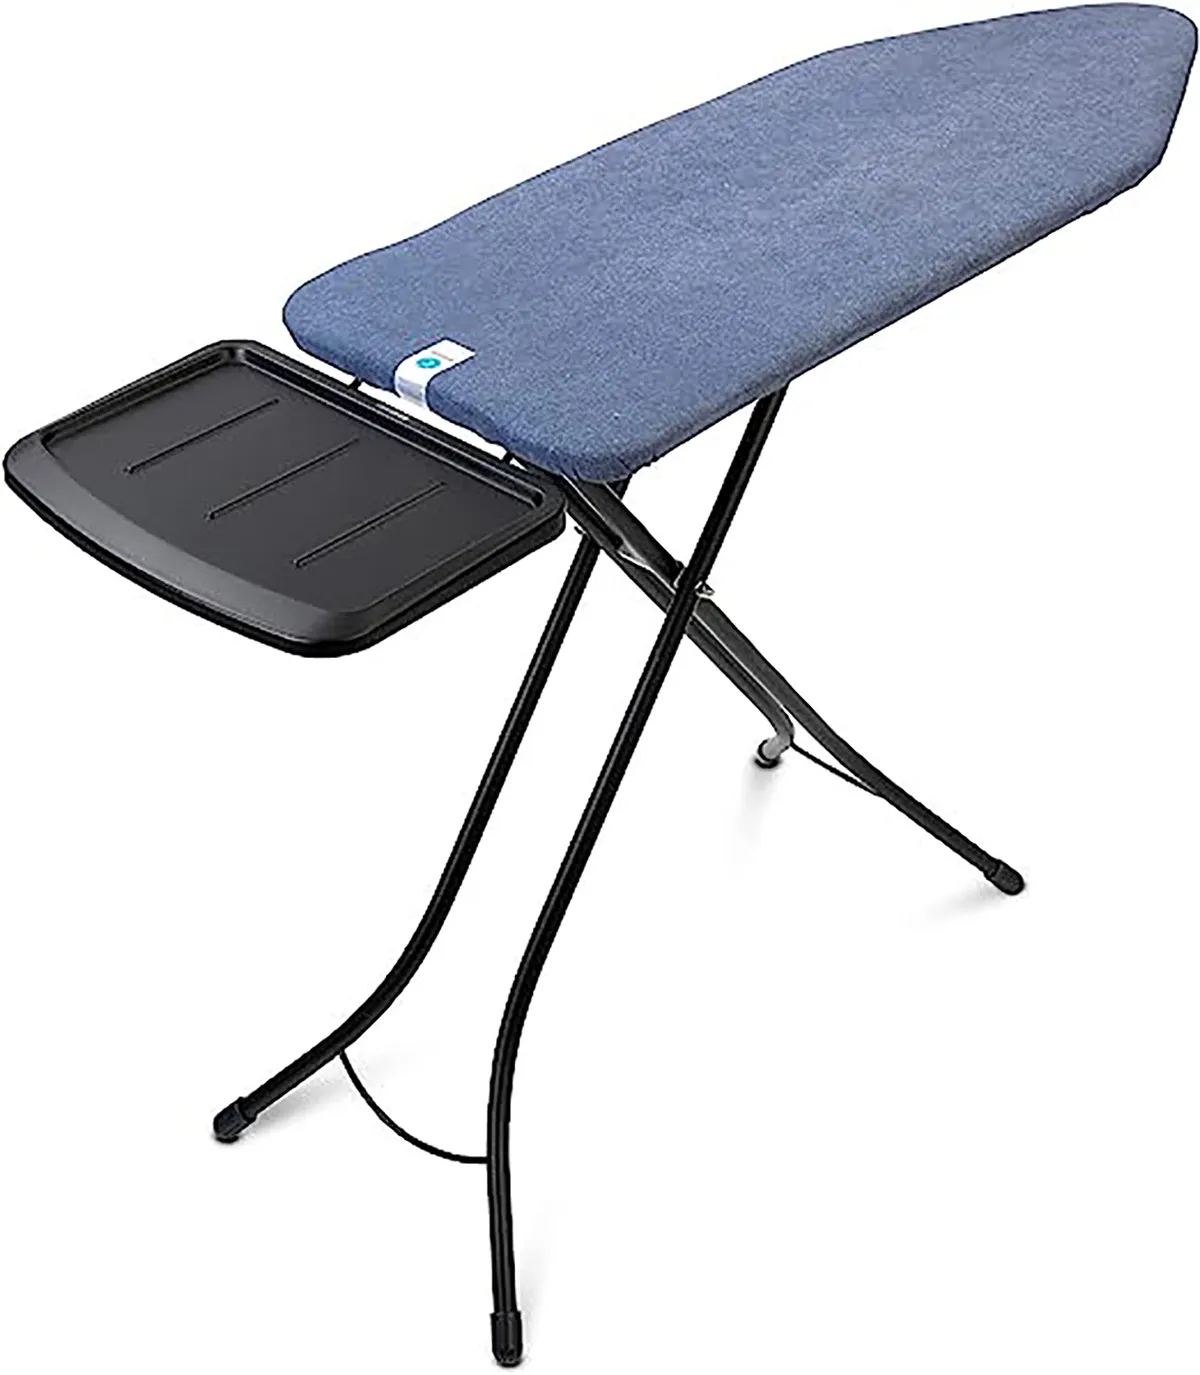 Brabantia ironing board for quilting XL